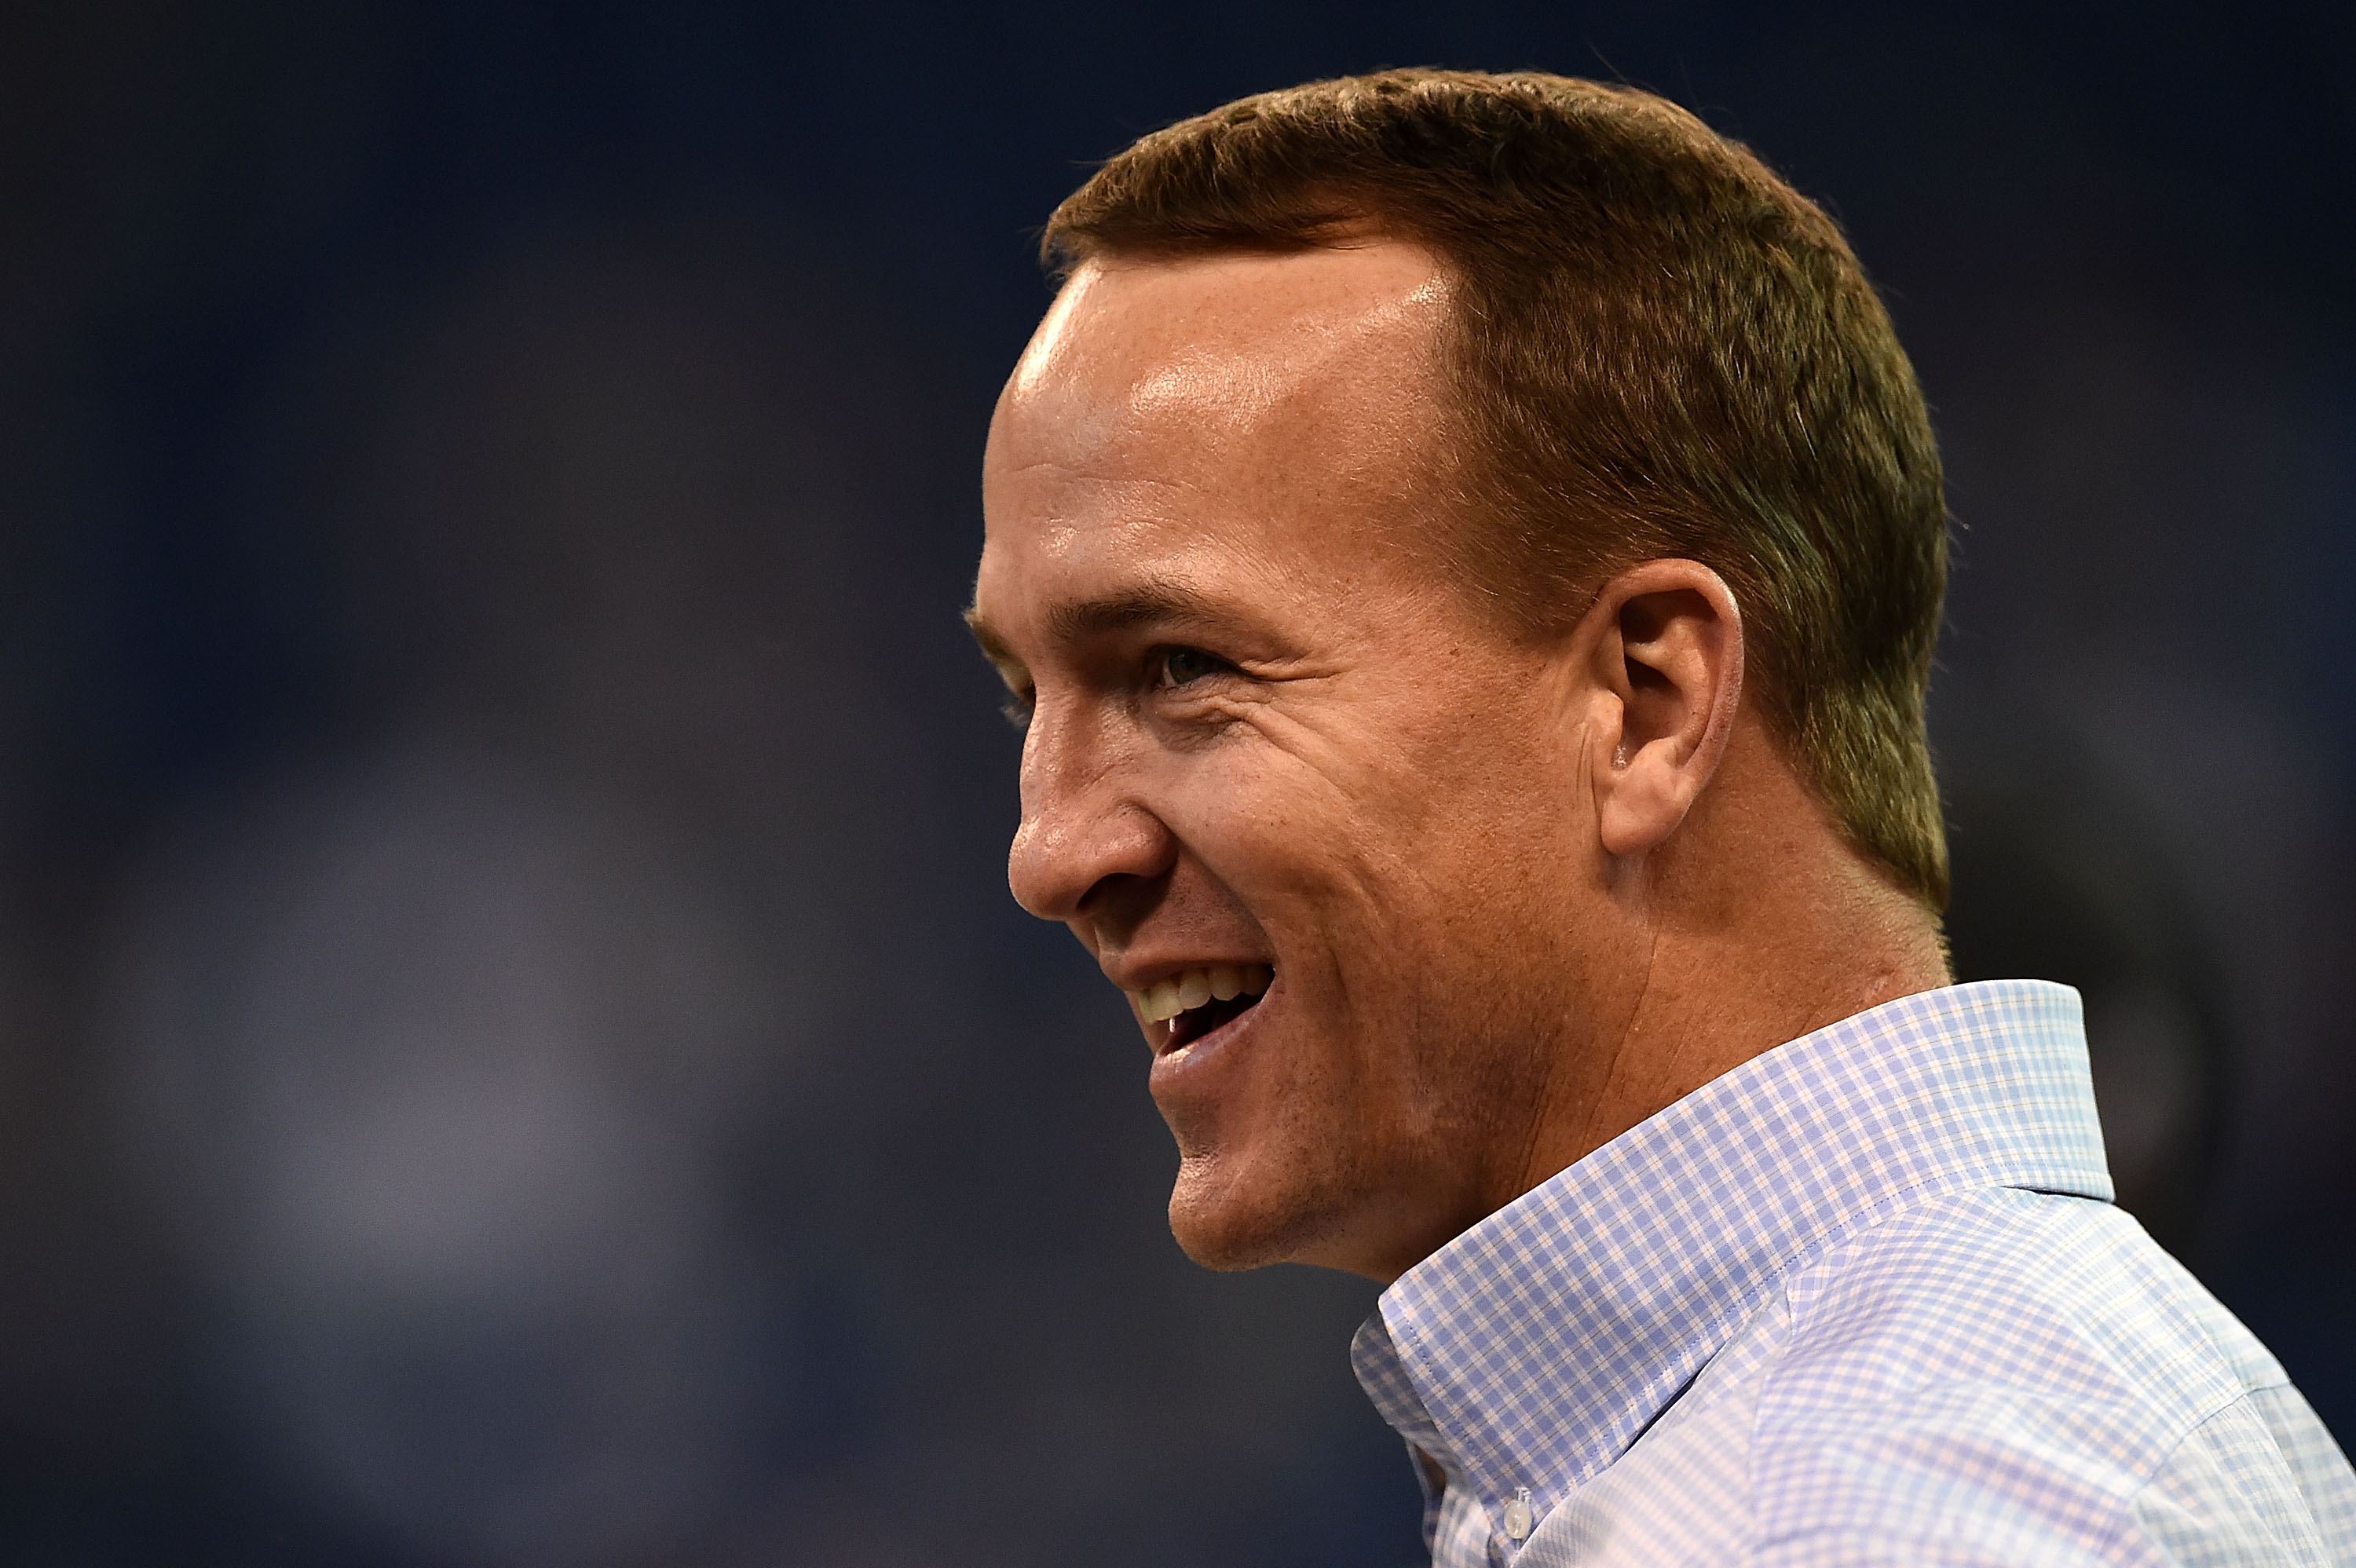 Peyton Manning: Hall of Fame origins evident in early Tennessee